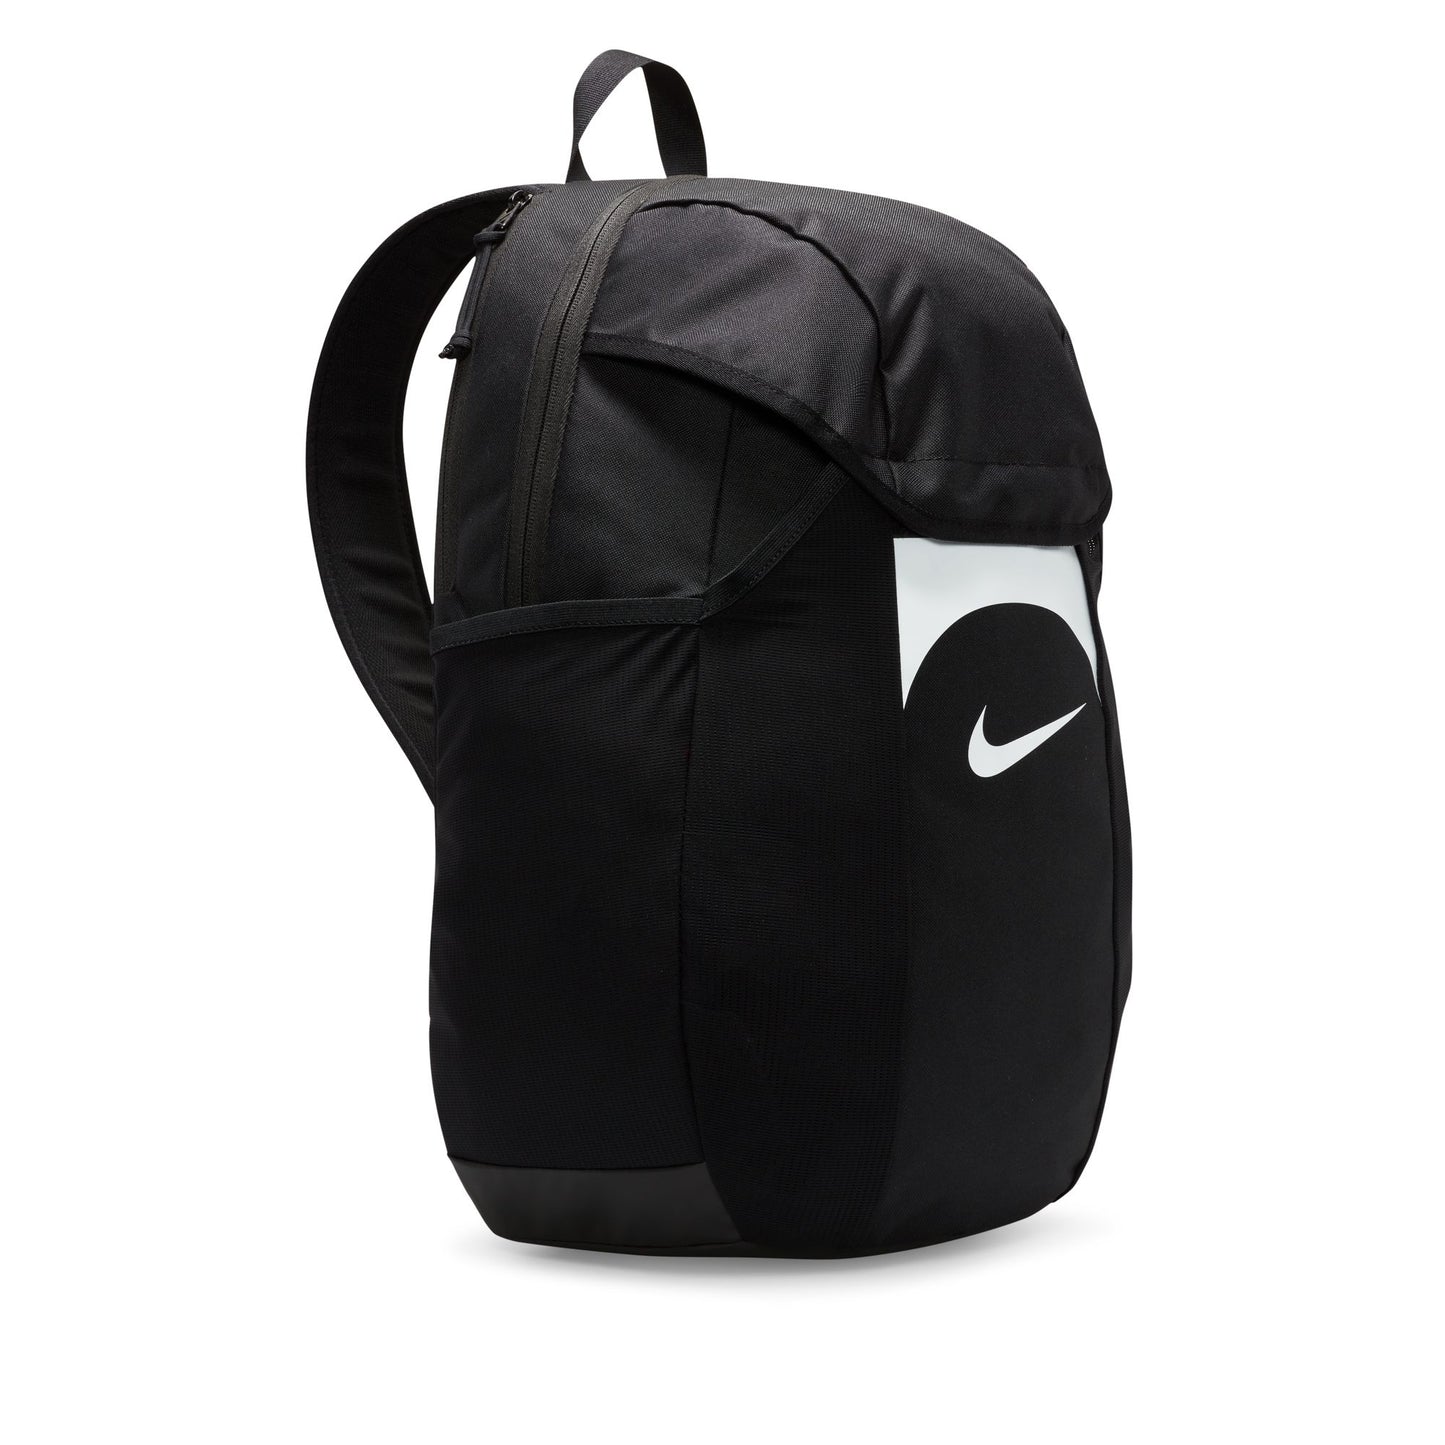 NORTH SHORE UNITED  TEAM BACKPACK